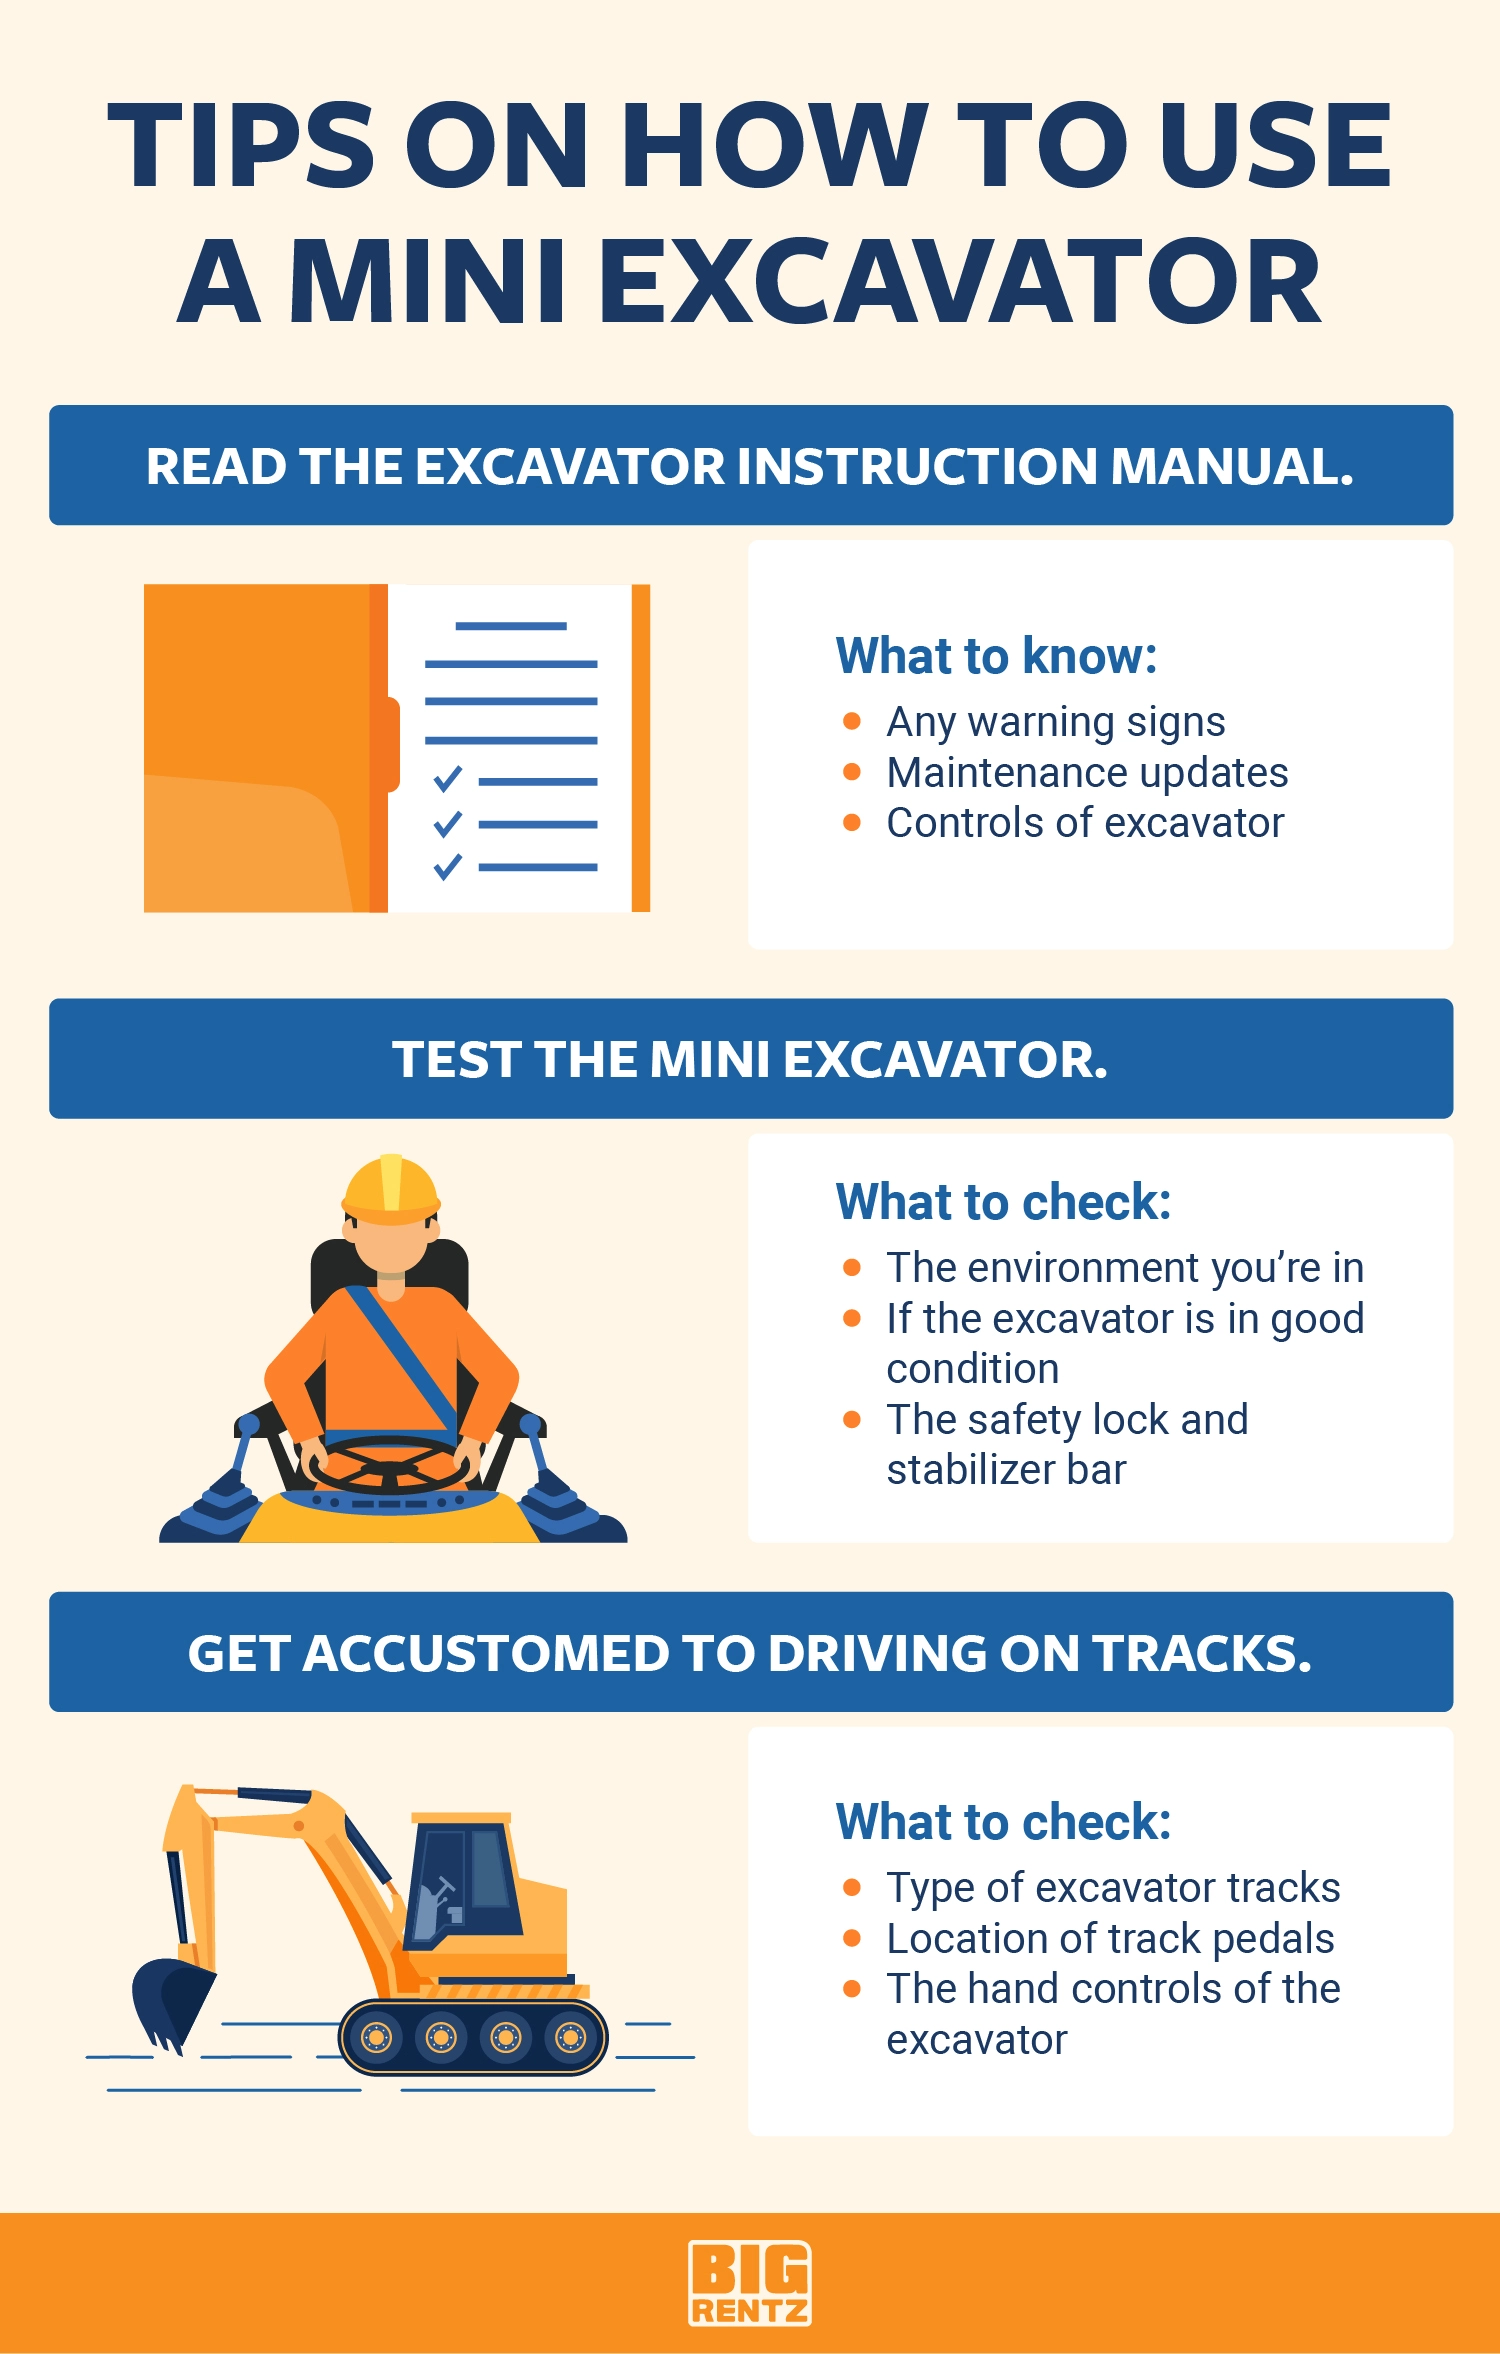 How to Master the Controls of an Excavator: A Step-by-Step Guide